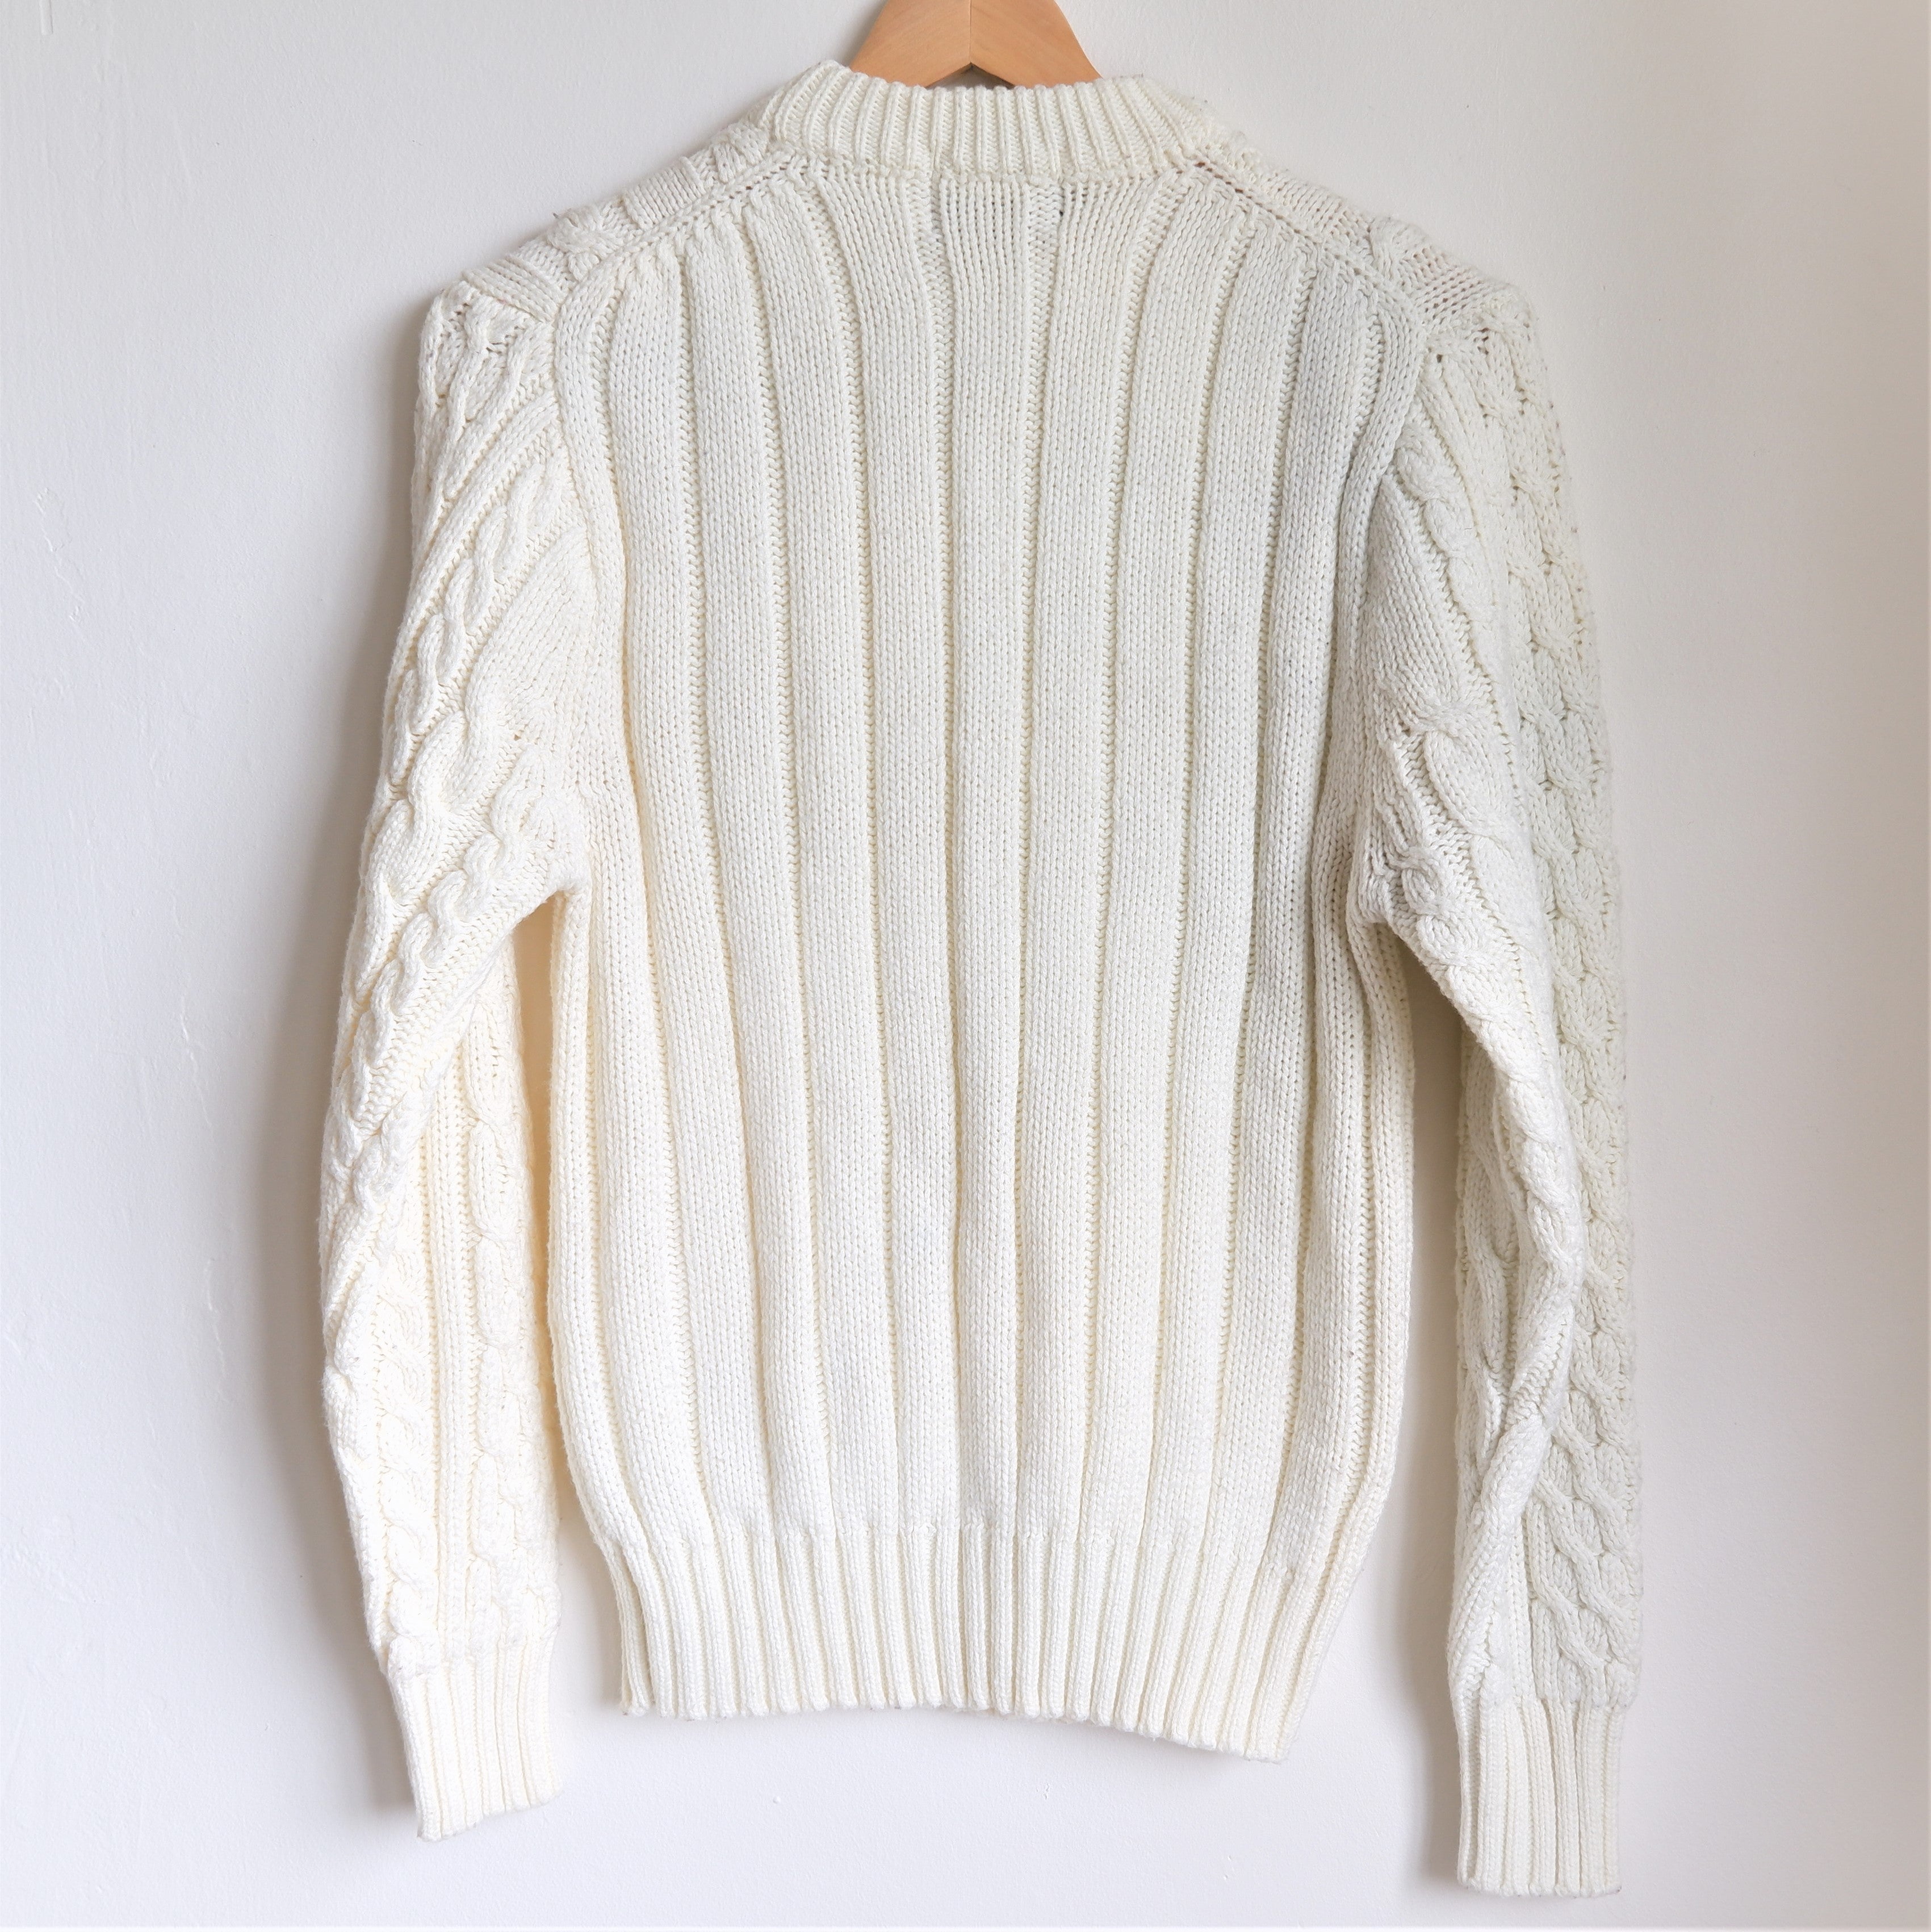 VINTAGE: Cream Cable Knit Sweater